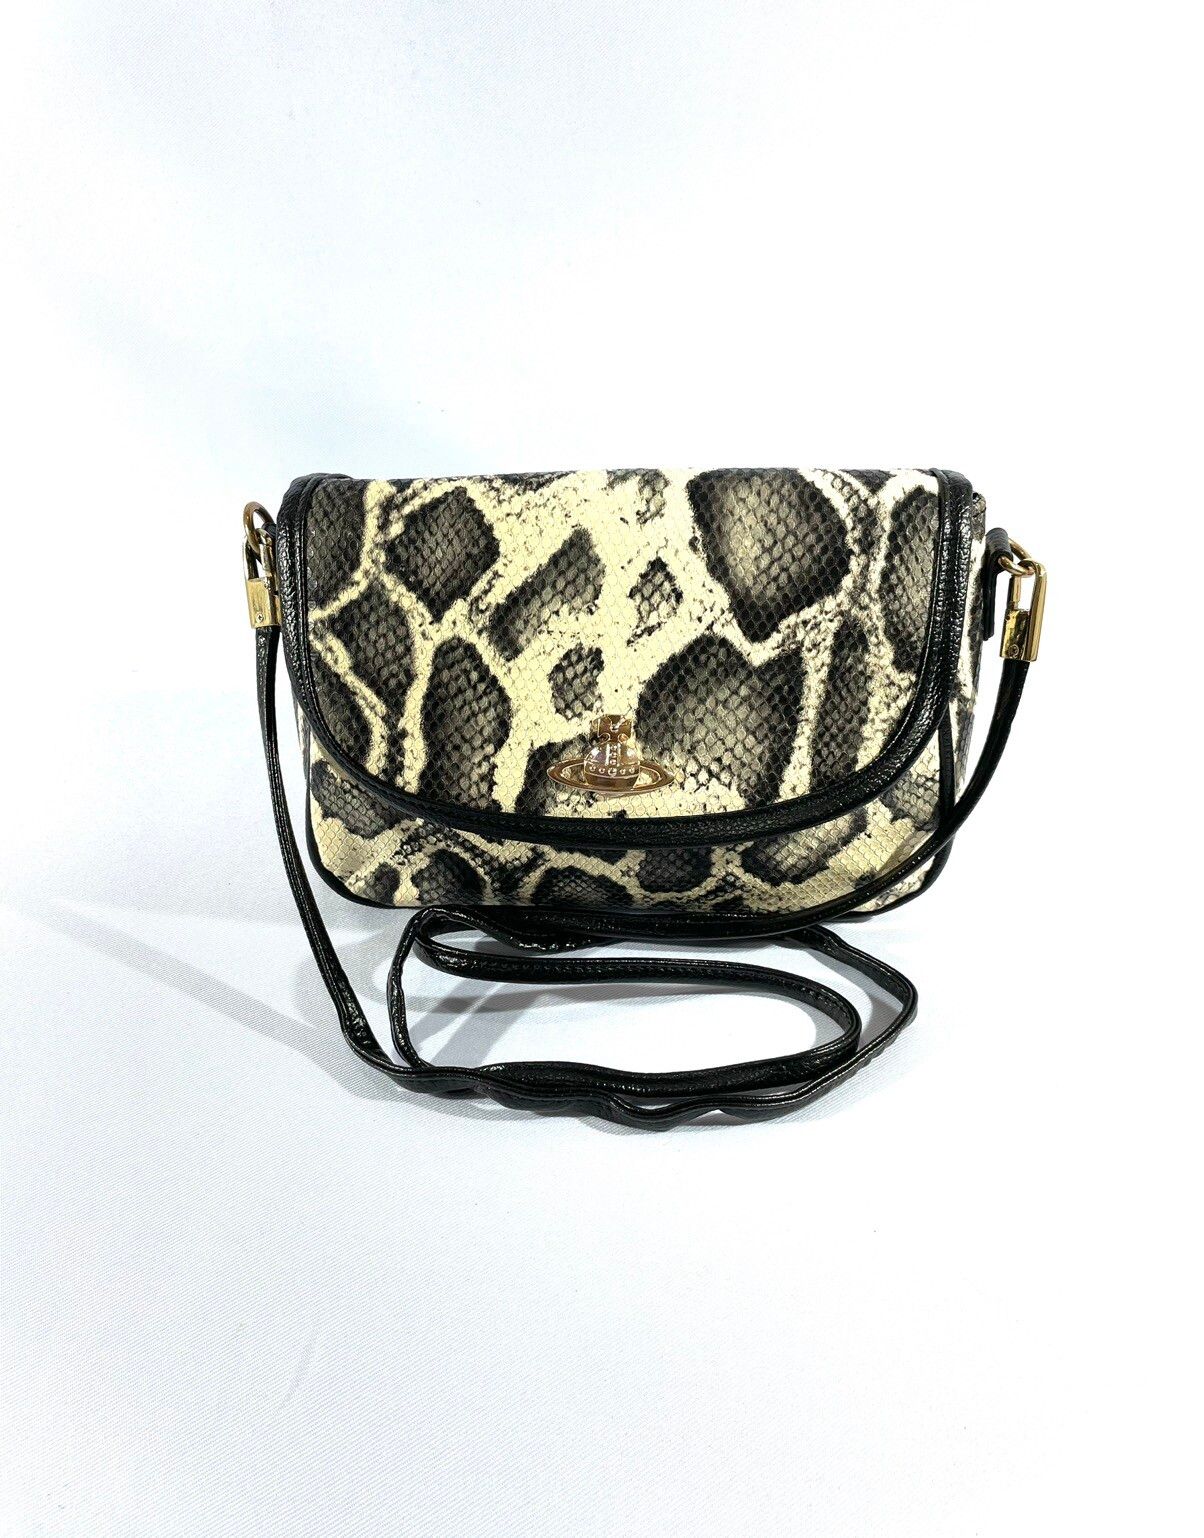 Vivienne Westwood Snake Skin Orb Crossbody Bag Size ONE SIZE - 1 Preview